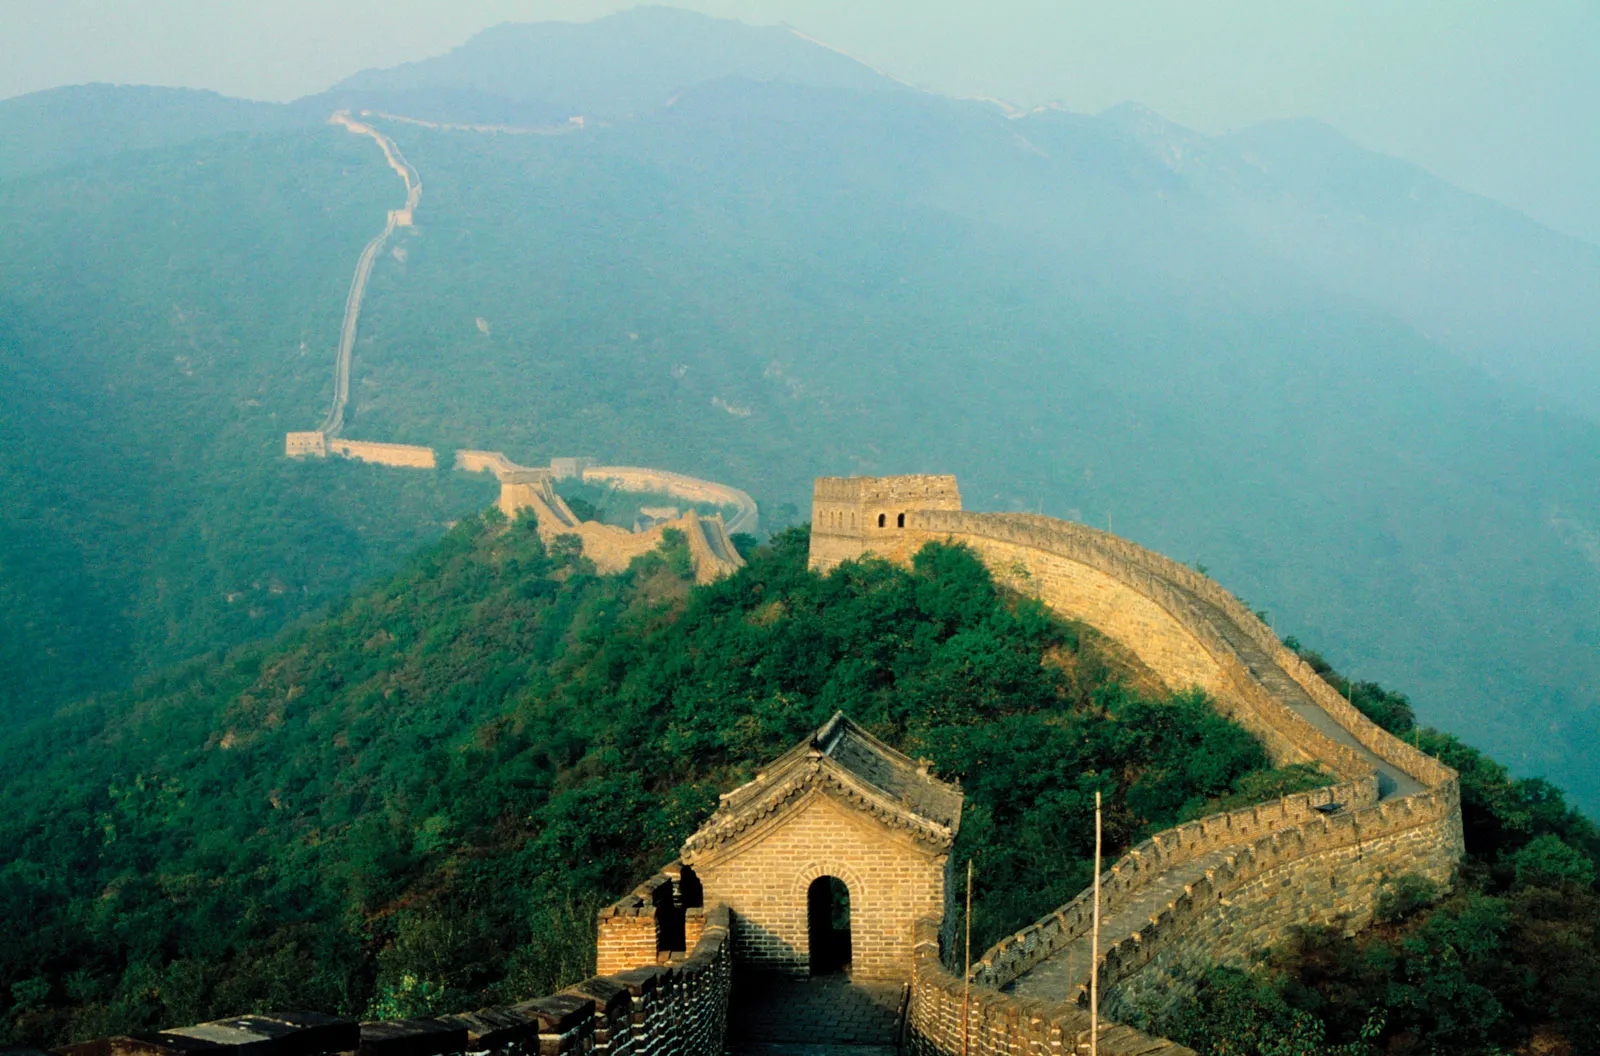 The Great Wall of China view